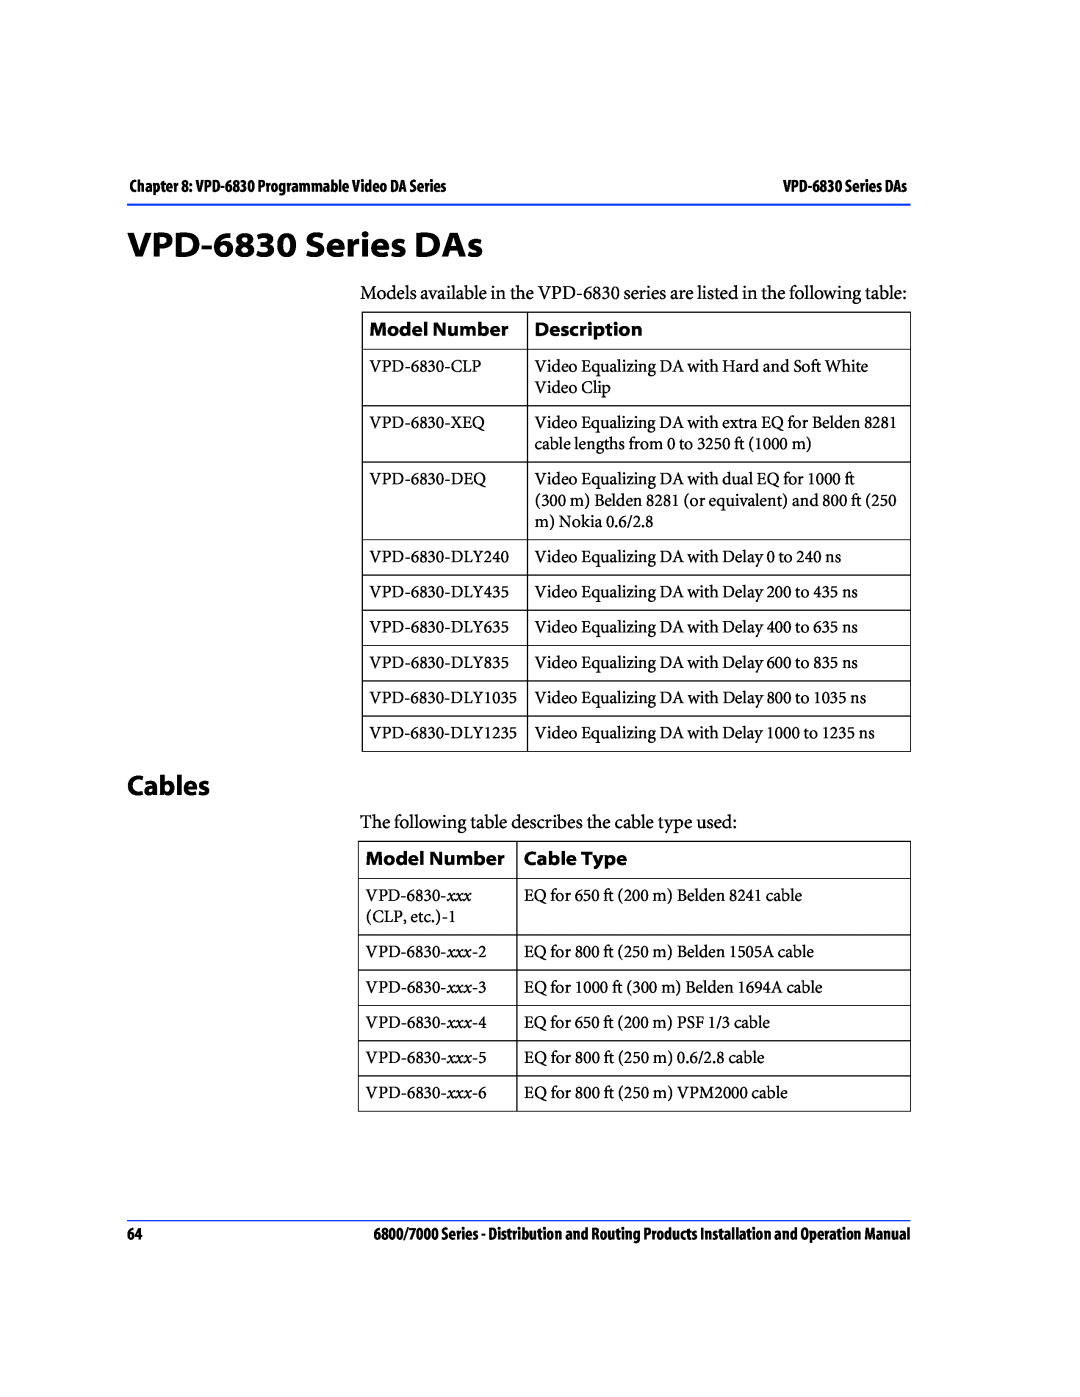 Nokia 7000 Series, 6800 Series operation manual VPD-6830 Series DAs, Cables, Model Number, Cable Type, Description 